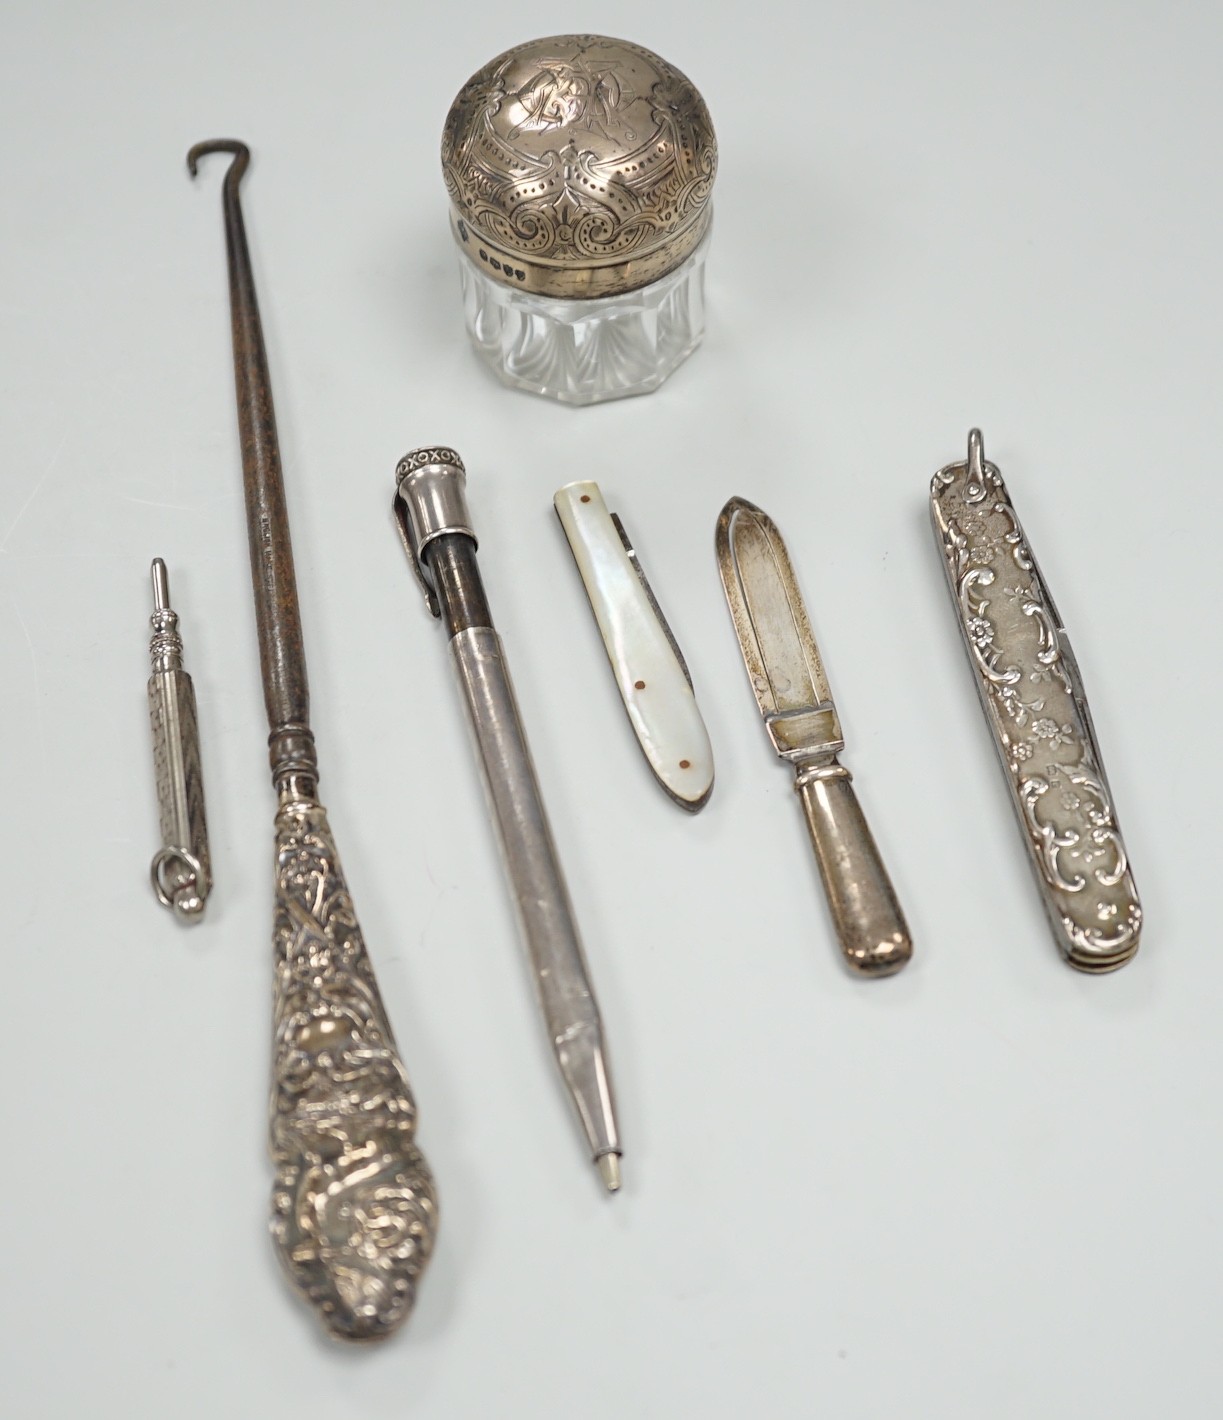 Sundry small silver including an Edwardian silver mounted pocket knife, mounted toilet jar, mounted button hook and a book mark (a.f.), together with a French white metal mounted Edacoto pencil (a.f.) and two other items